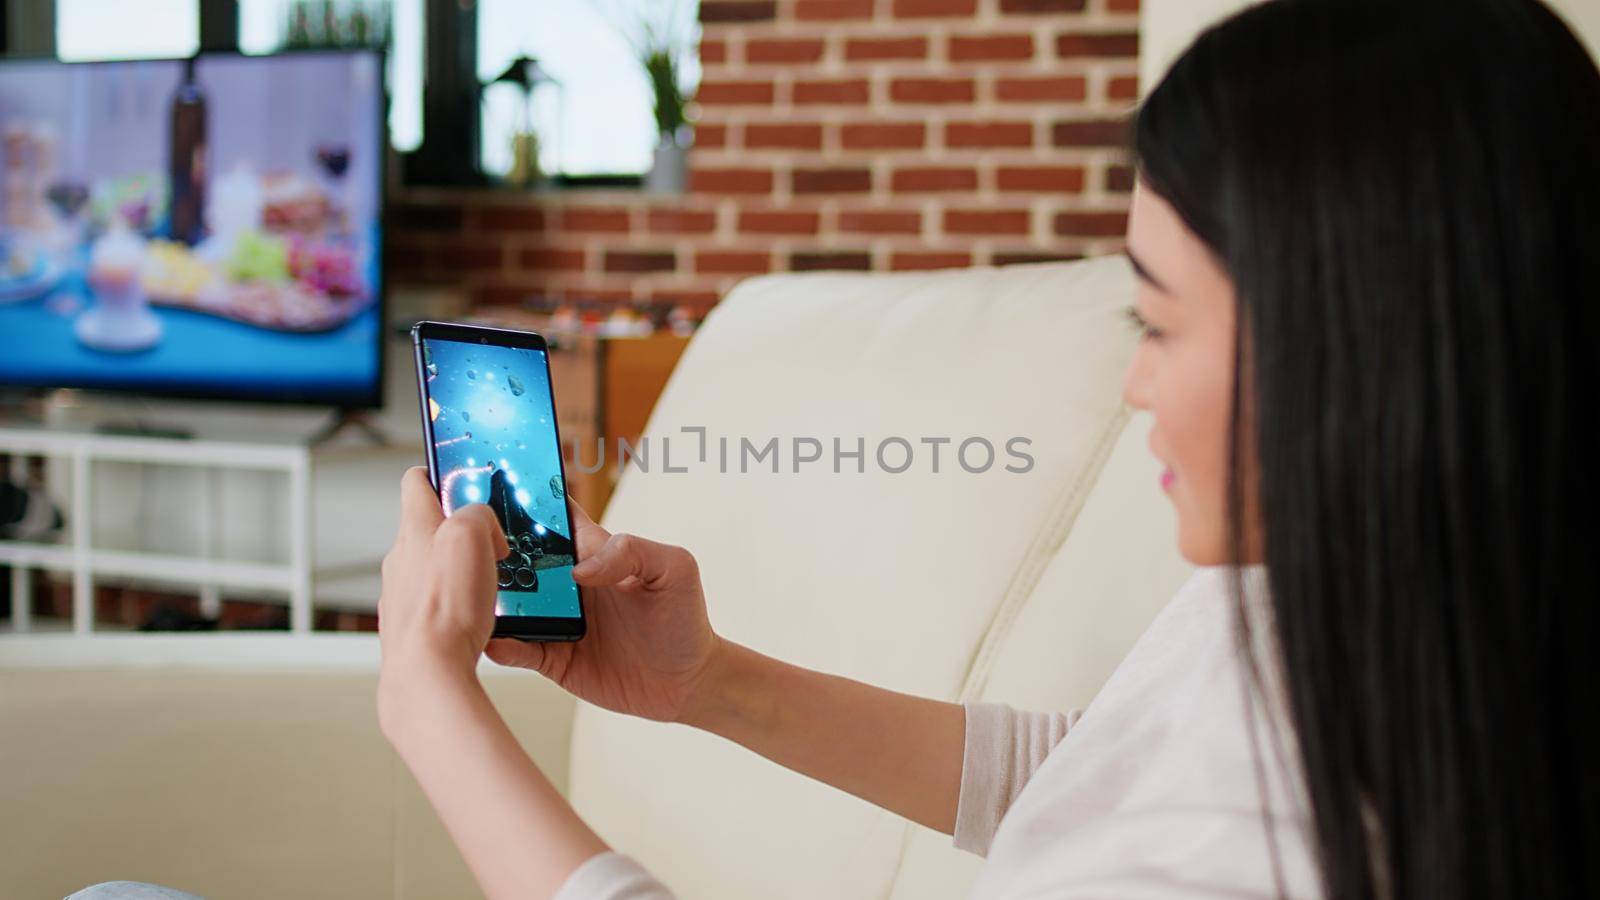 Playful asian woman playing space shooter game on smartphone device while working remotely from home. Childish young adult person enjoying mobile gaming while sitting on sofa inside apartment.